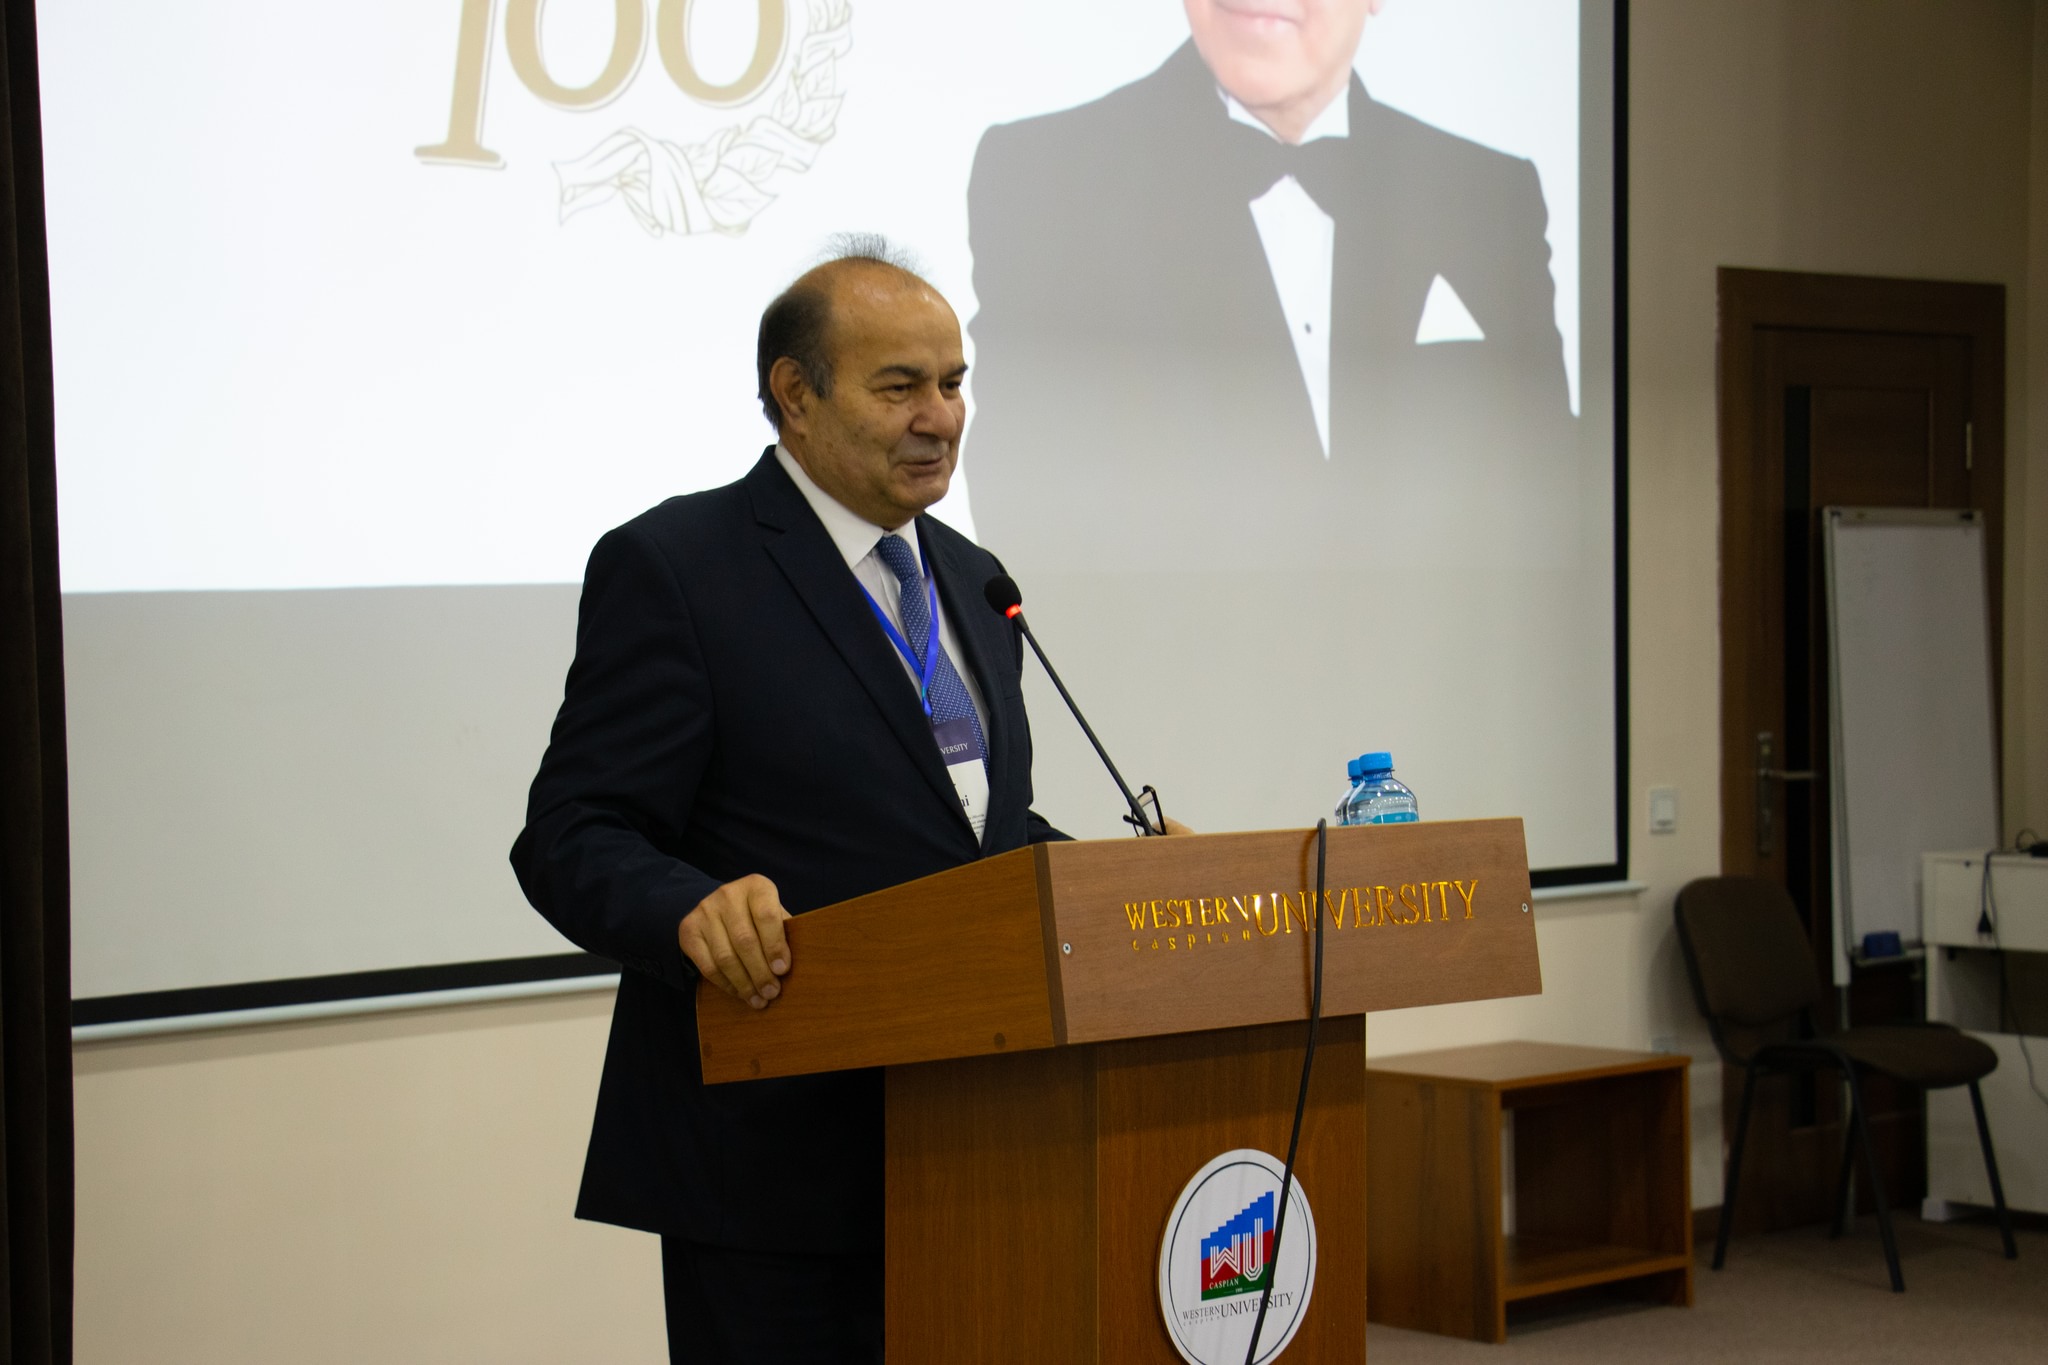 Young Researchers Hold a Conference in honour of Heydar Aliyev’s 100th Birth Anniversary at Western Caspian University